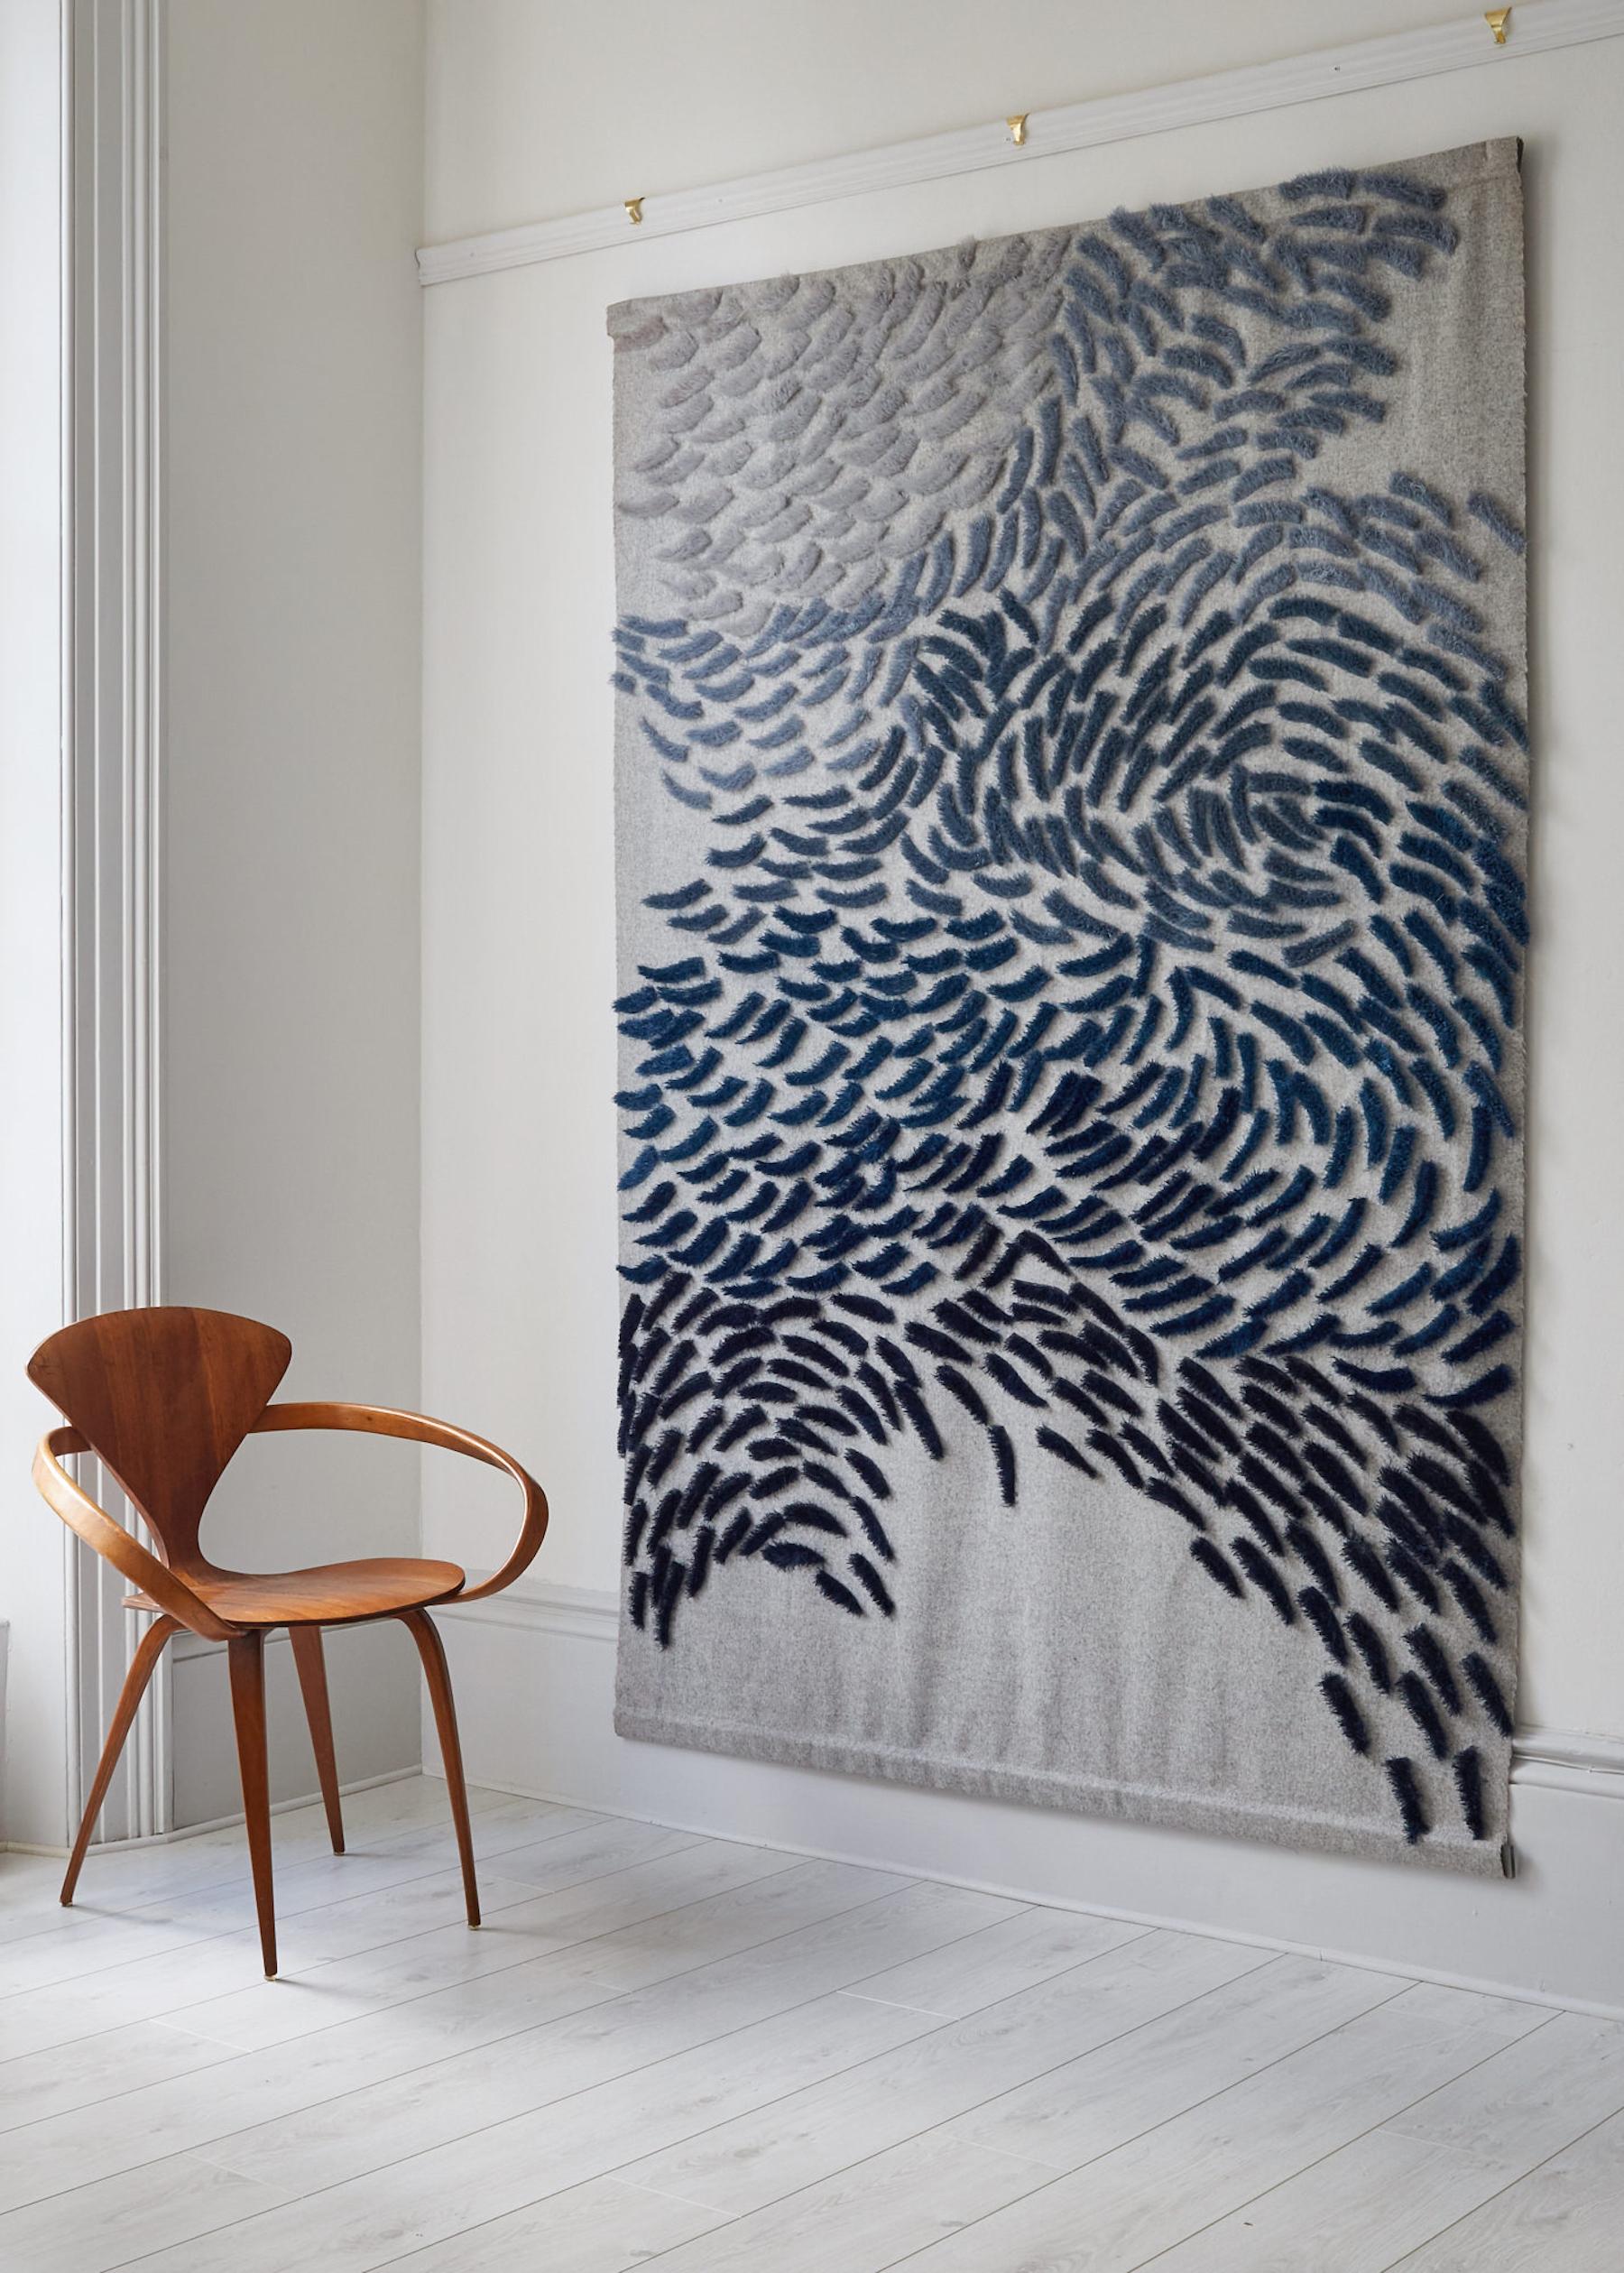 Murmuration - Tufted textile wall hanging by British artist Anna Gravelle For Sale 6